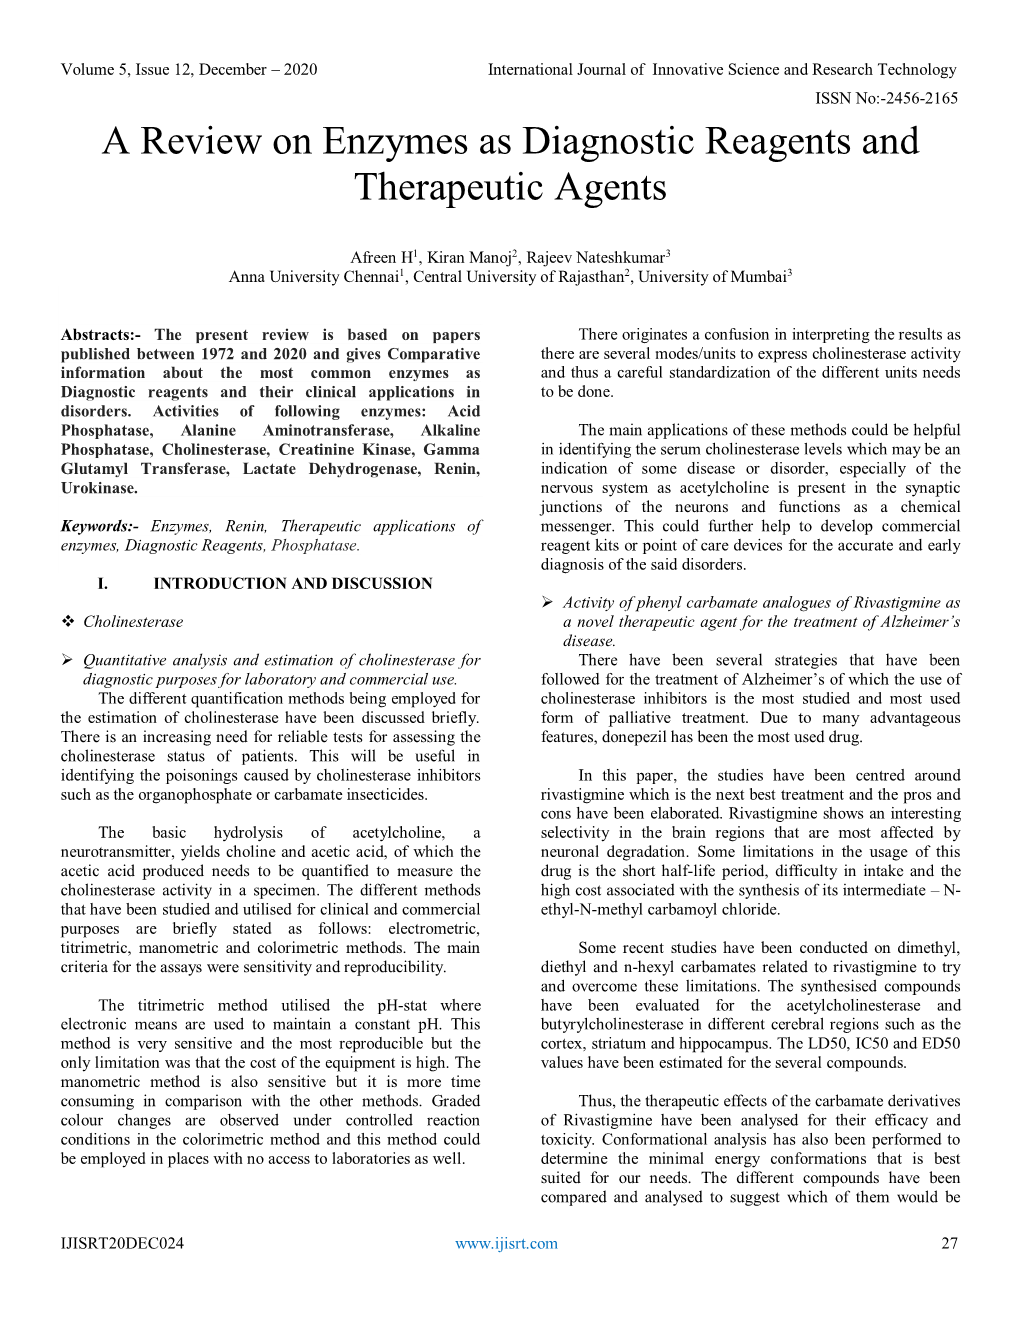 A Review on Enzymes As Diagnostic Reagents and Therapeutic Agents